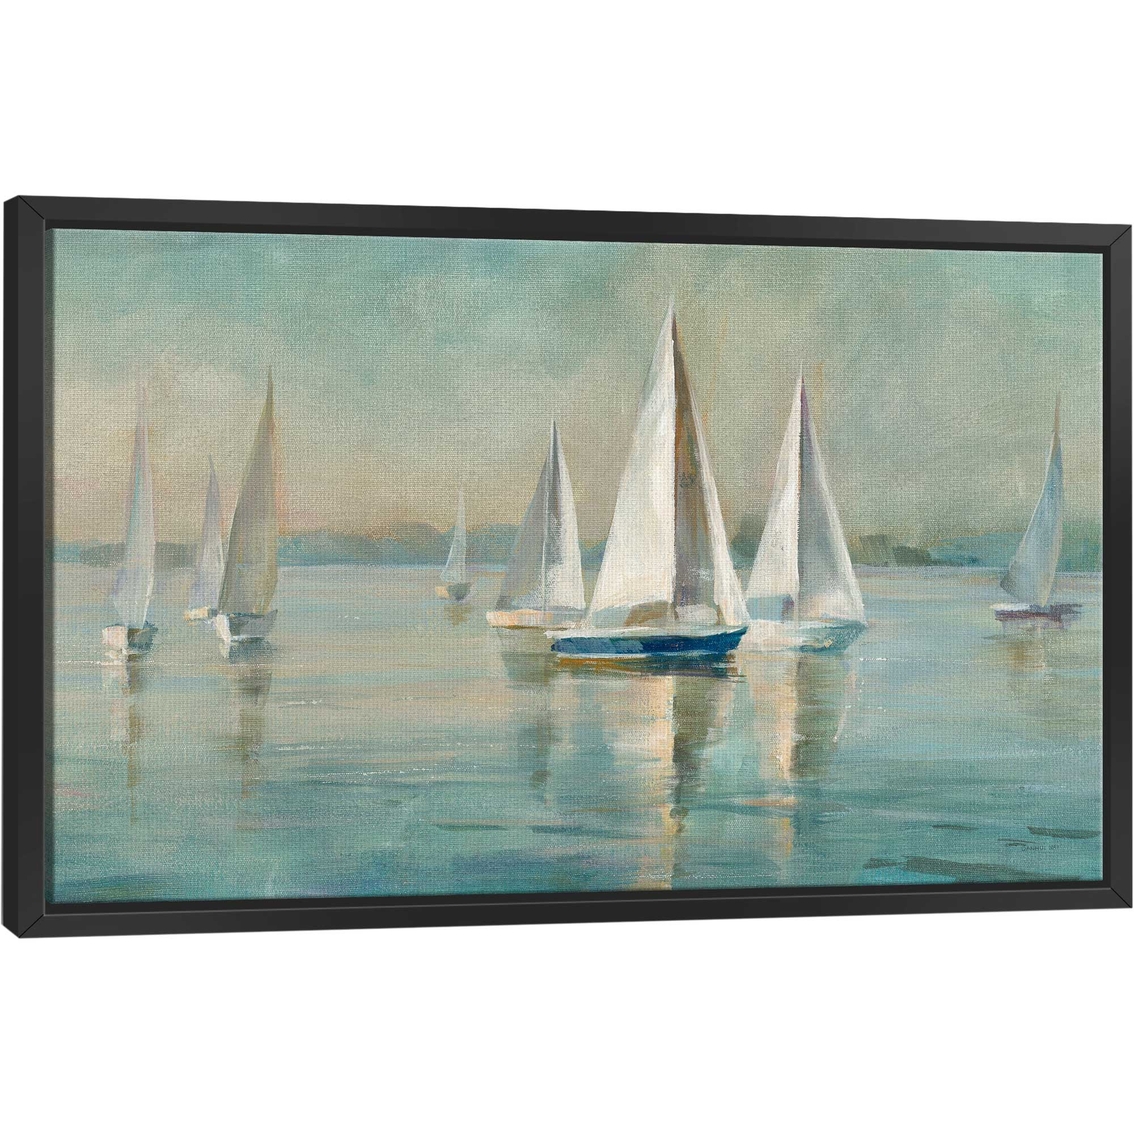 Inkstry Sailboats at Sunrise Crop Framed Canvas Giclee - Image 2 of 3